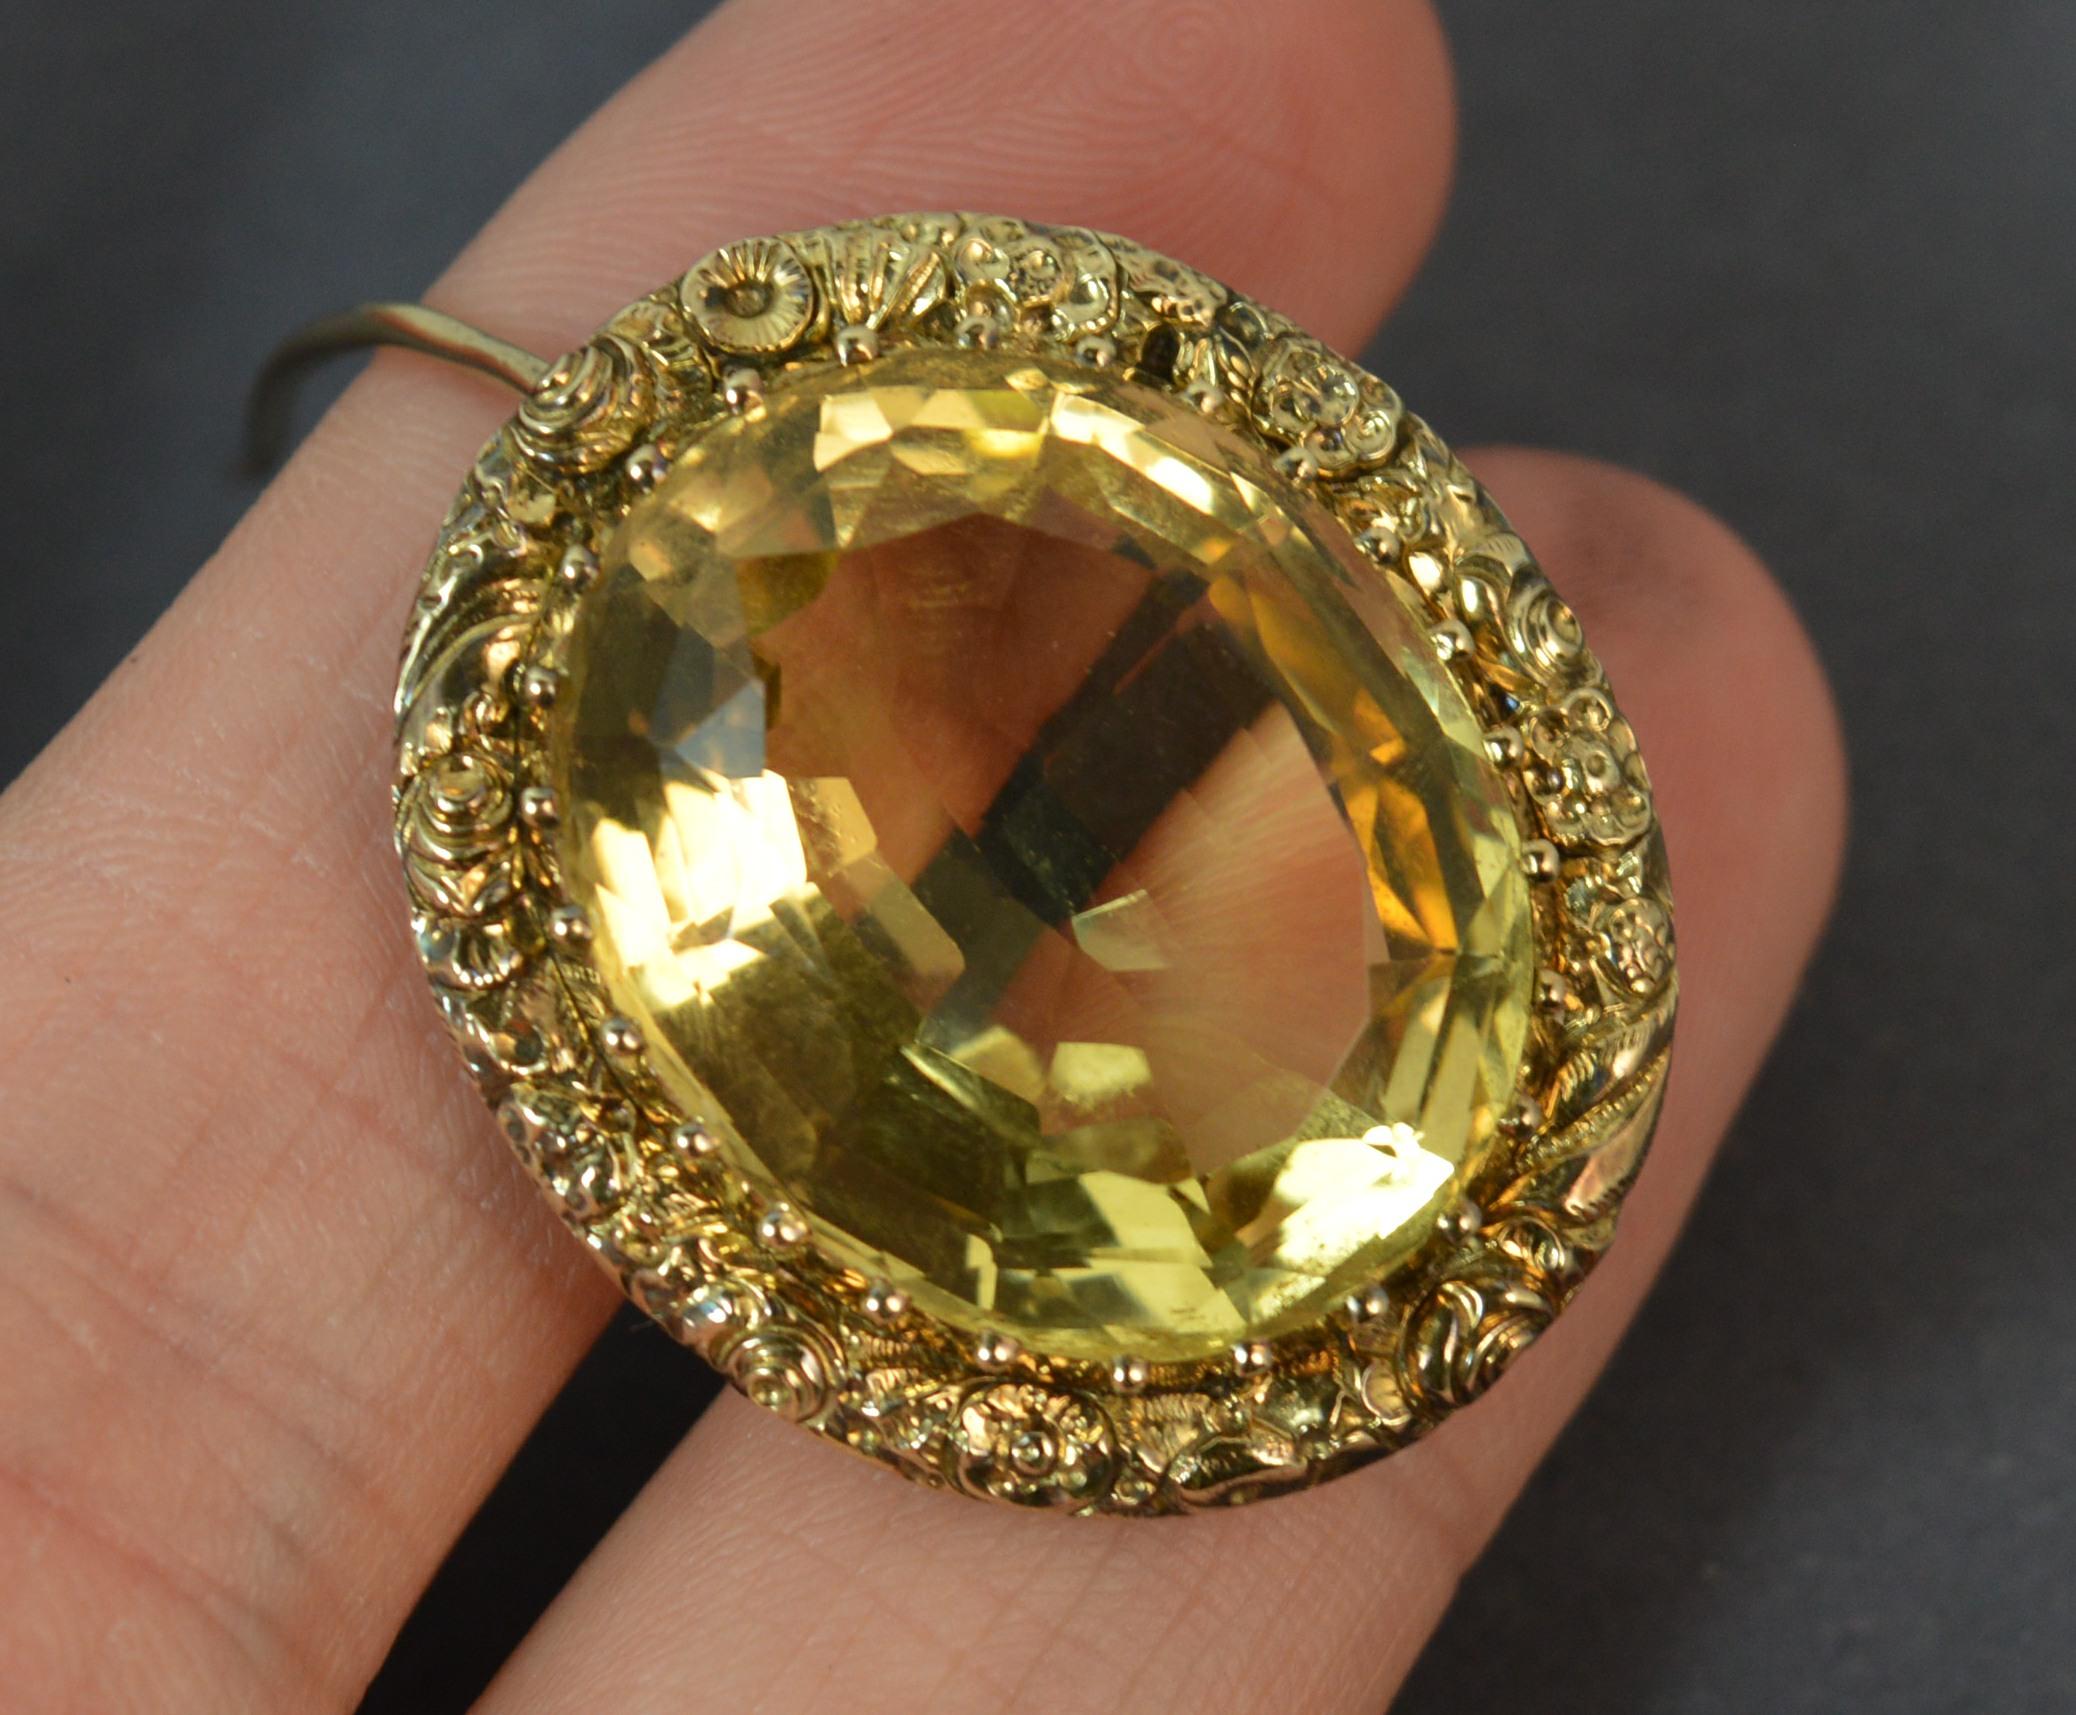 A stunning Georgian period brooch c1800. 
Solid 15 carat gold border. The front designed with deep floral relief pattern throughout.
The centre a large lemon drop expertly cut oval shaped citrine in full bezel setting. Stone approx 18.5mm x